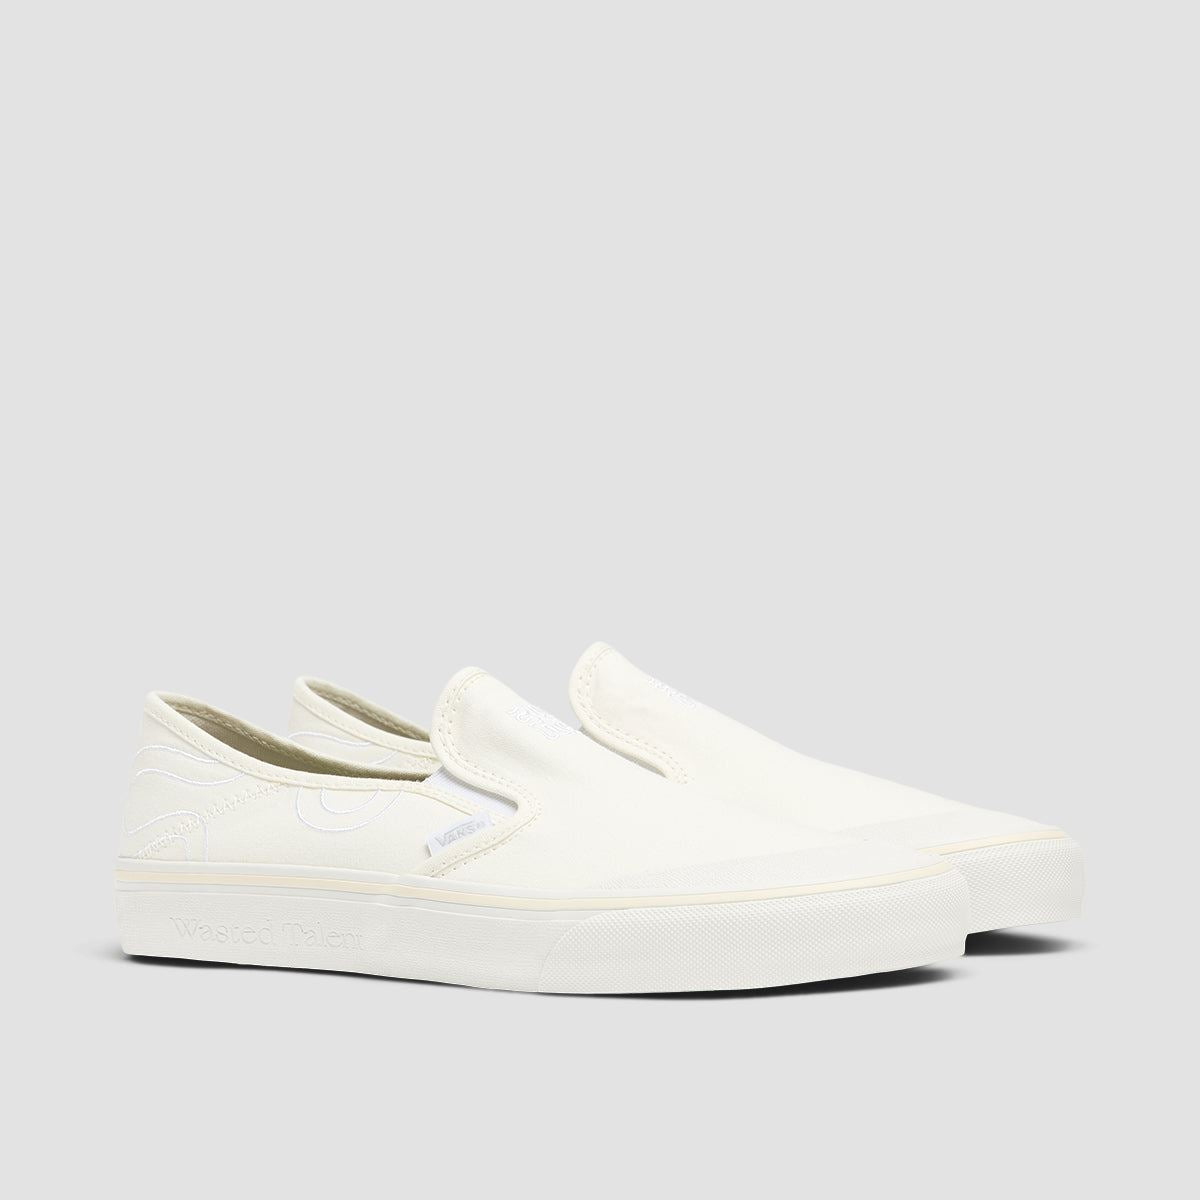 Vans X Wasted Talent VR3 SF Slip-On Shoes - Blanc De Blanc